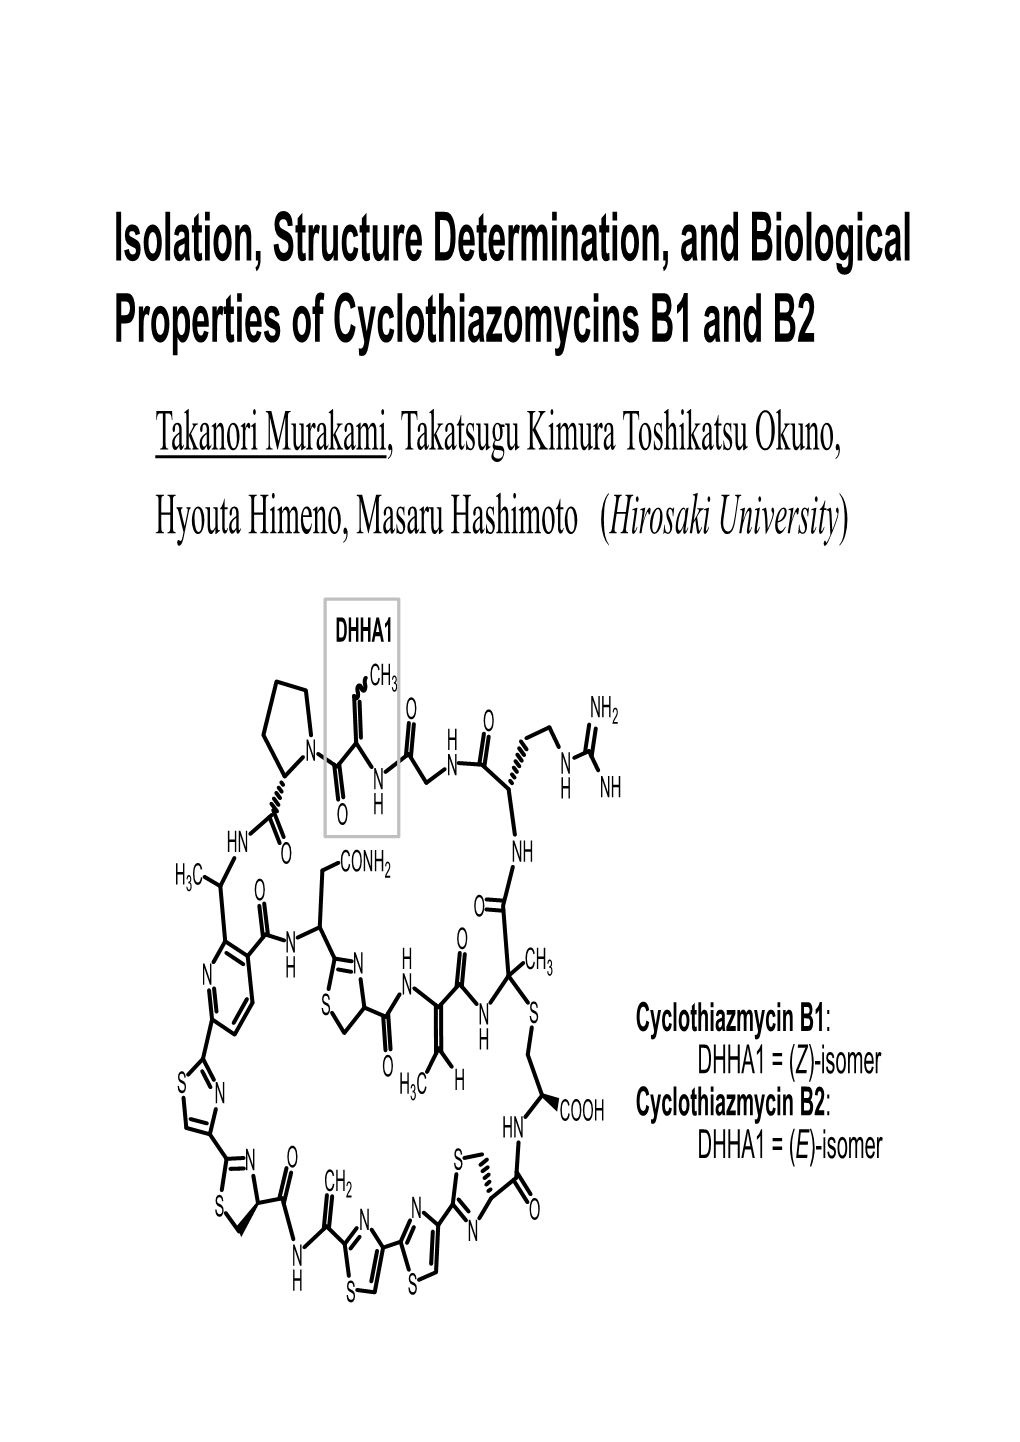 Isolation, Structure Determination, and Biological Properties Of